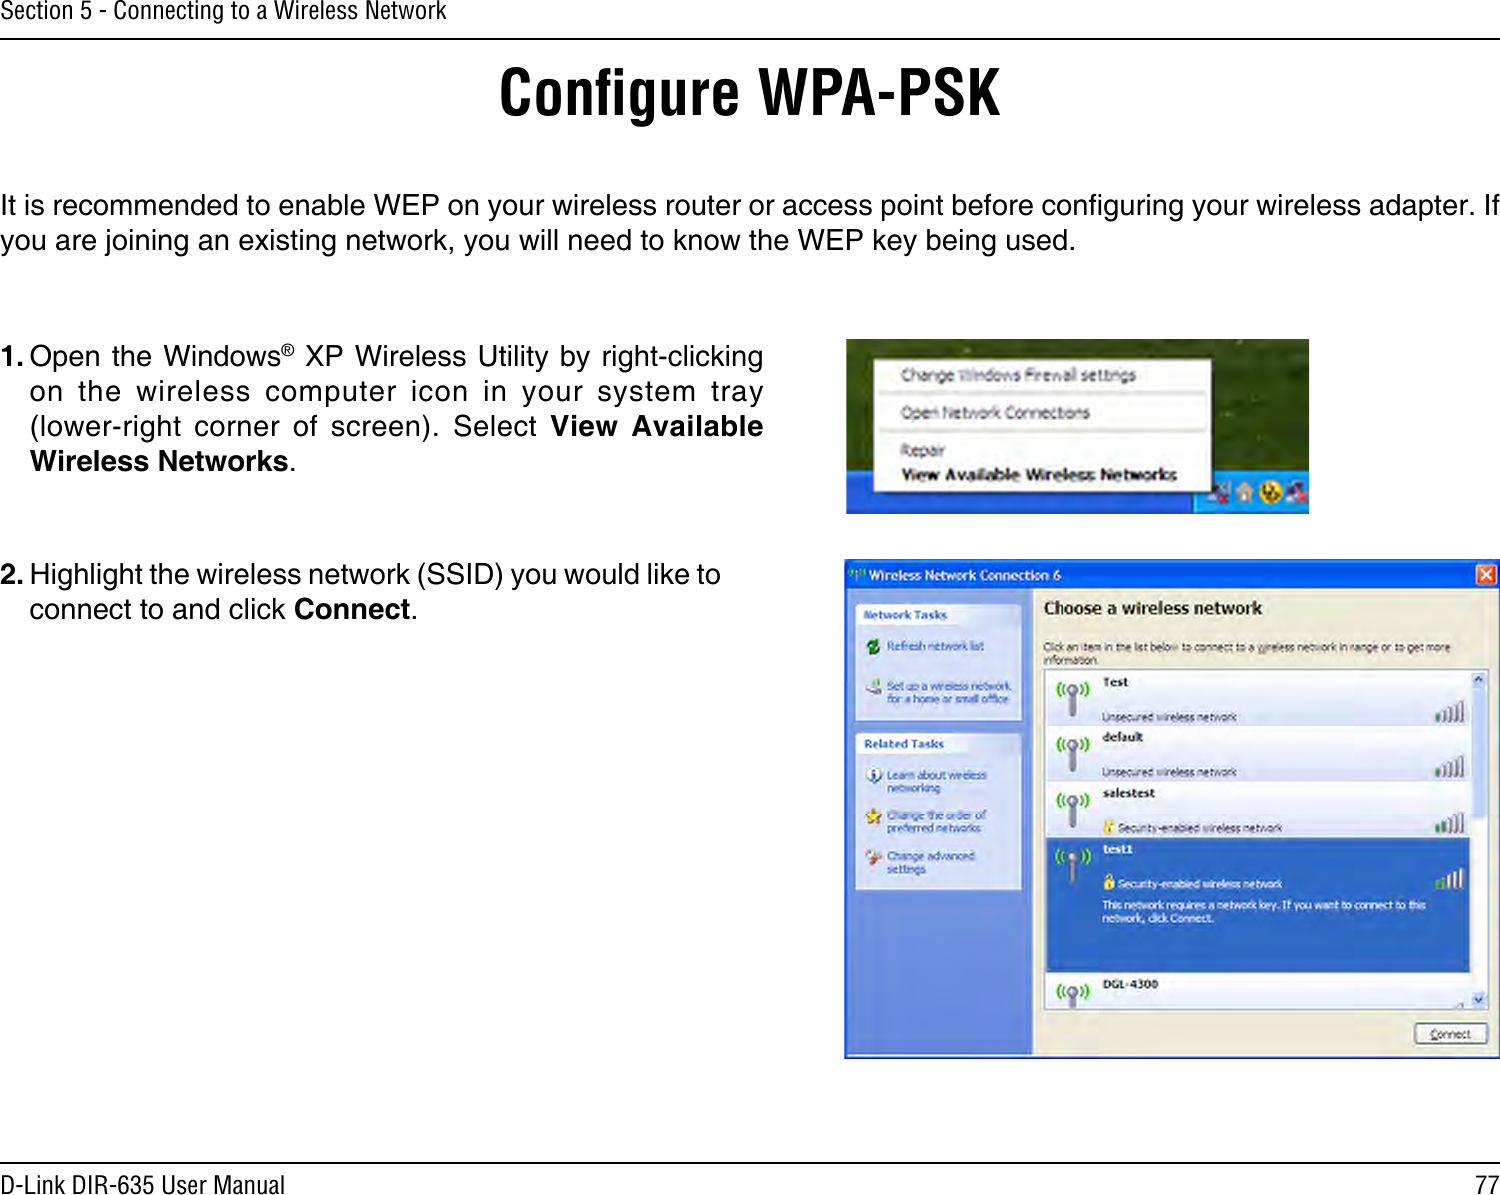 77D-Link DIR-635 User ManualSection 5 - Connecting to a Wireless NetworkConﬁgure WPA-PSKIt is recommended to enable WEP on your wireless router or access point before conguring your wireless adapter. If you are joining an existing network, you will need to know the WEP key being used.2. Highlight the wireless network (SSID) you would like to connect to and click Connect.1. Open the Windows® XP Wireless Utility by right-clicking on  the  wireless  computer  icon  in  your  system  tray  (lower-right  corner  of  screen).  Select  View  Available Wireless Networks. 